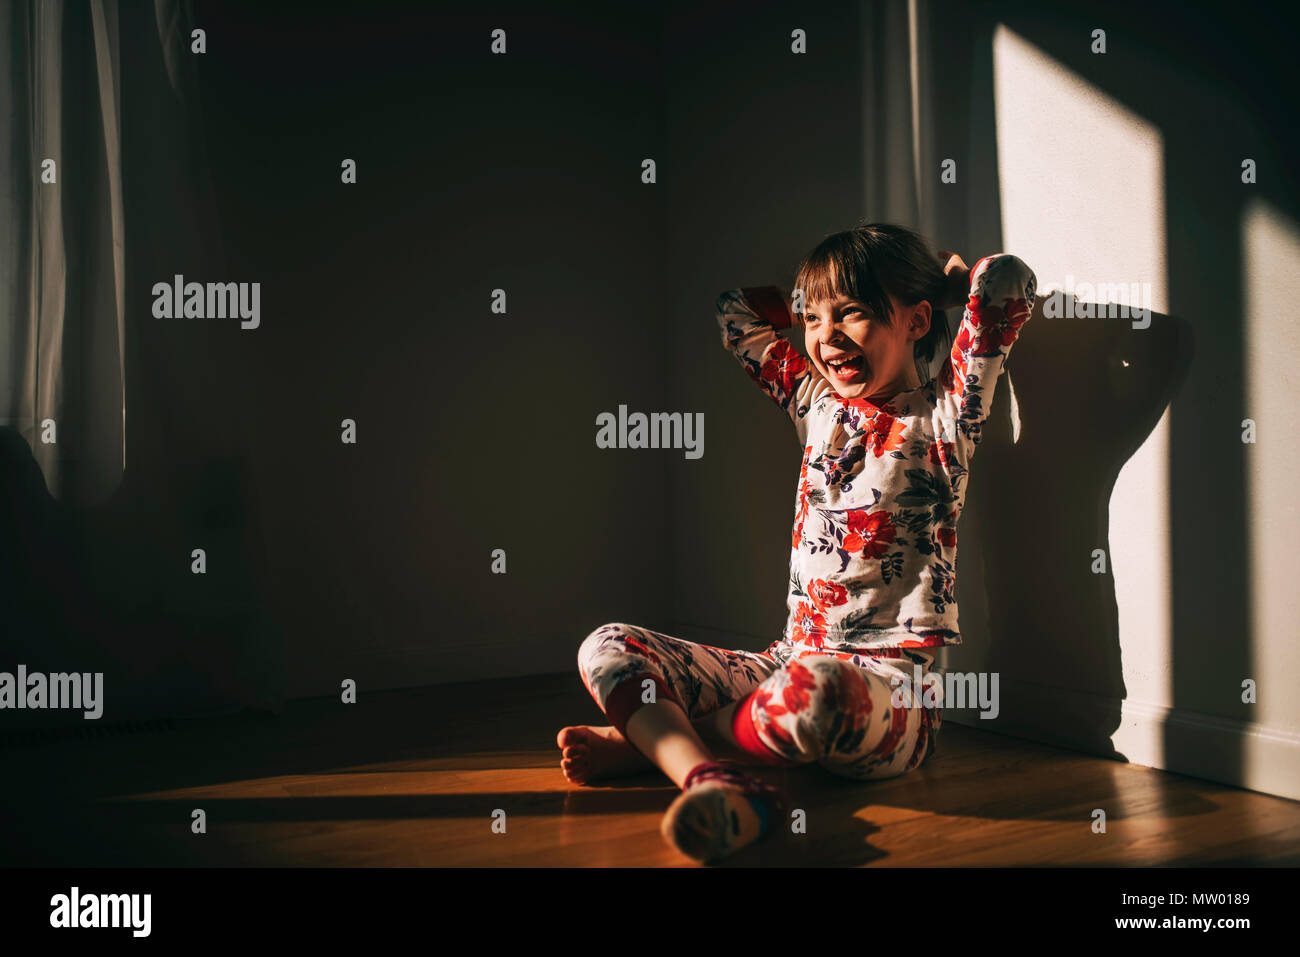 Girl sitting on the floor in her pyjamas laughing Stock Photo